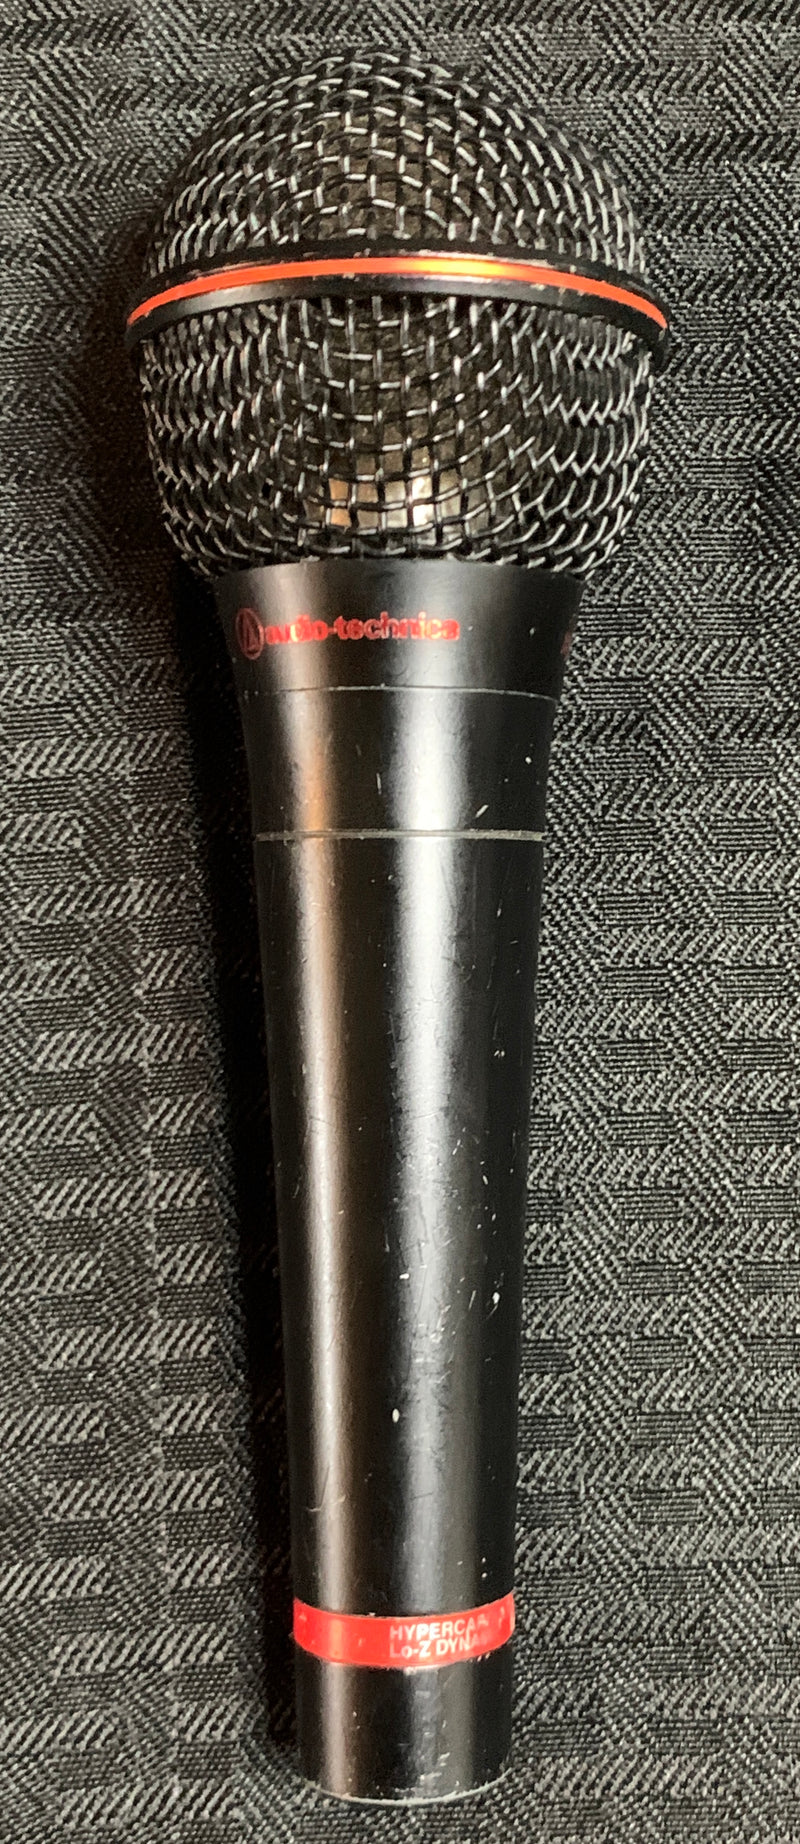 Audio Technica 1000HE Hypercardioid Dynamic Microphone Handheld -3 Pin XLR- Previously Owned (AW-CONSIGNMENT)